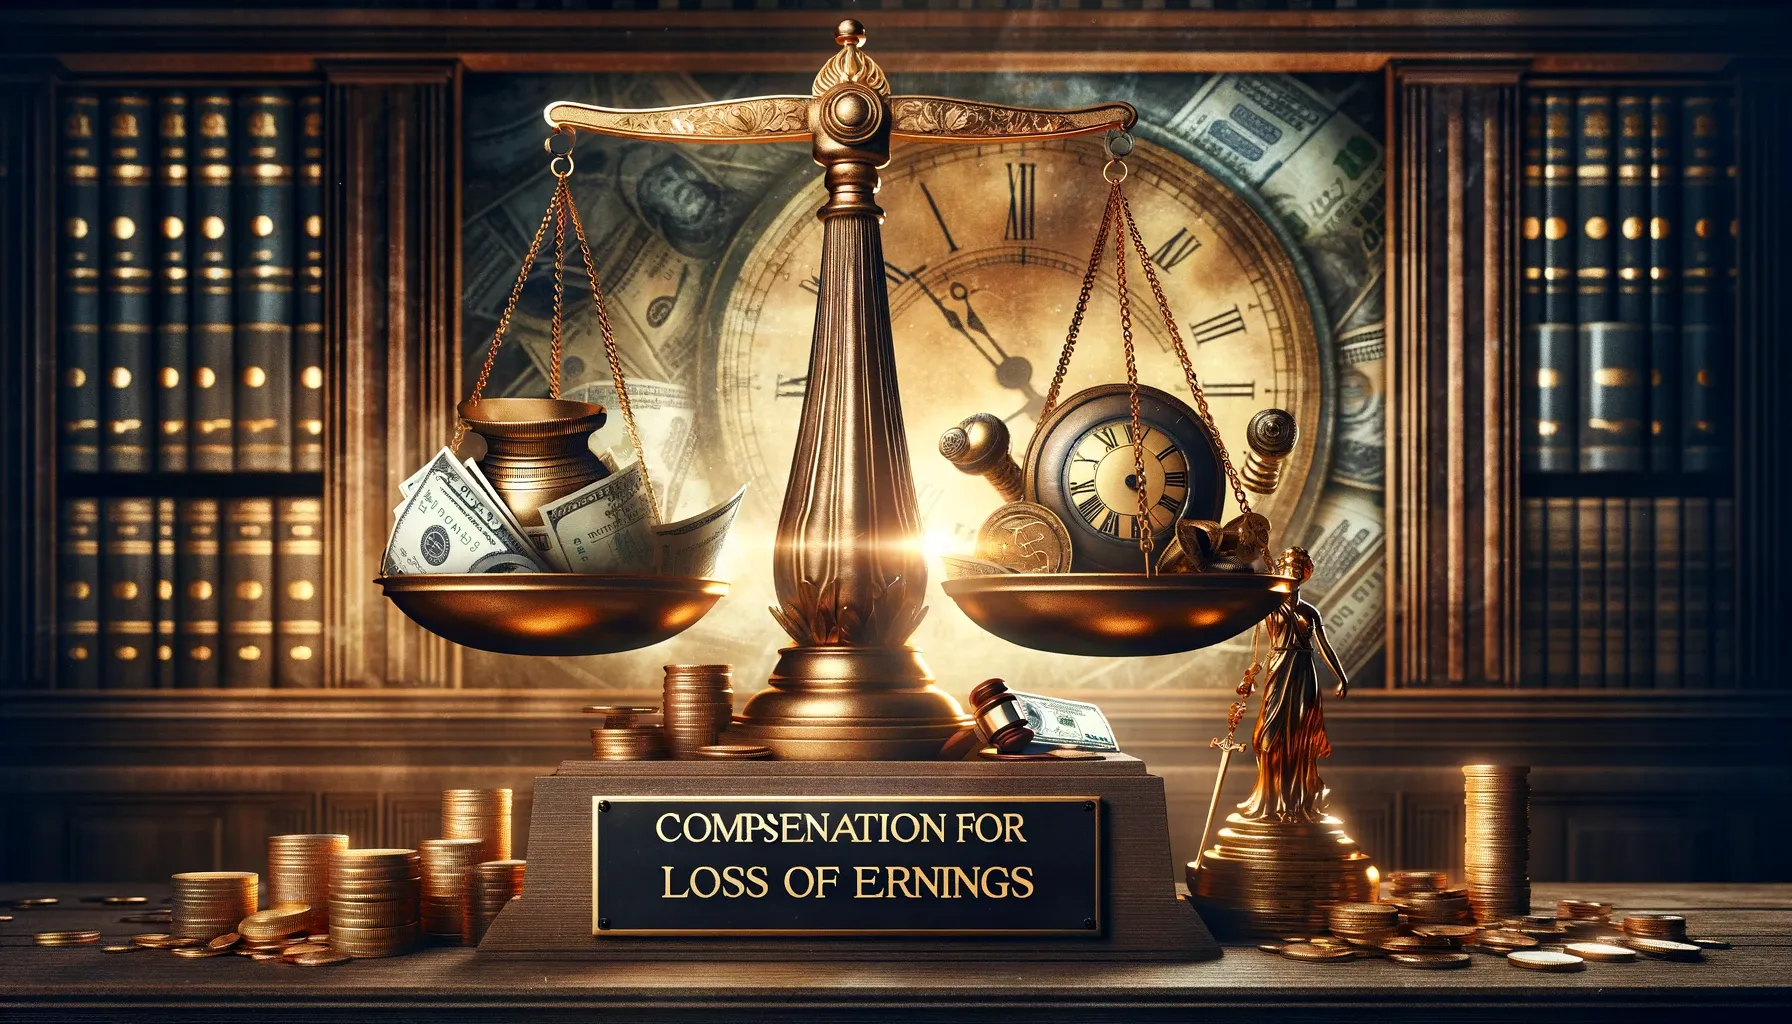 Can I claim compensation for loss of earnings